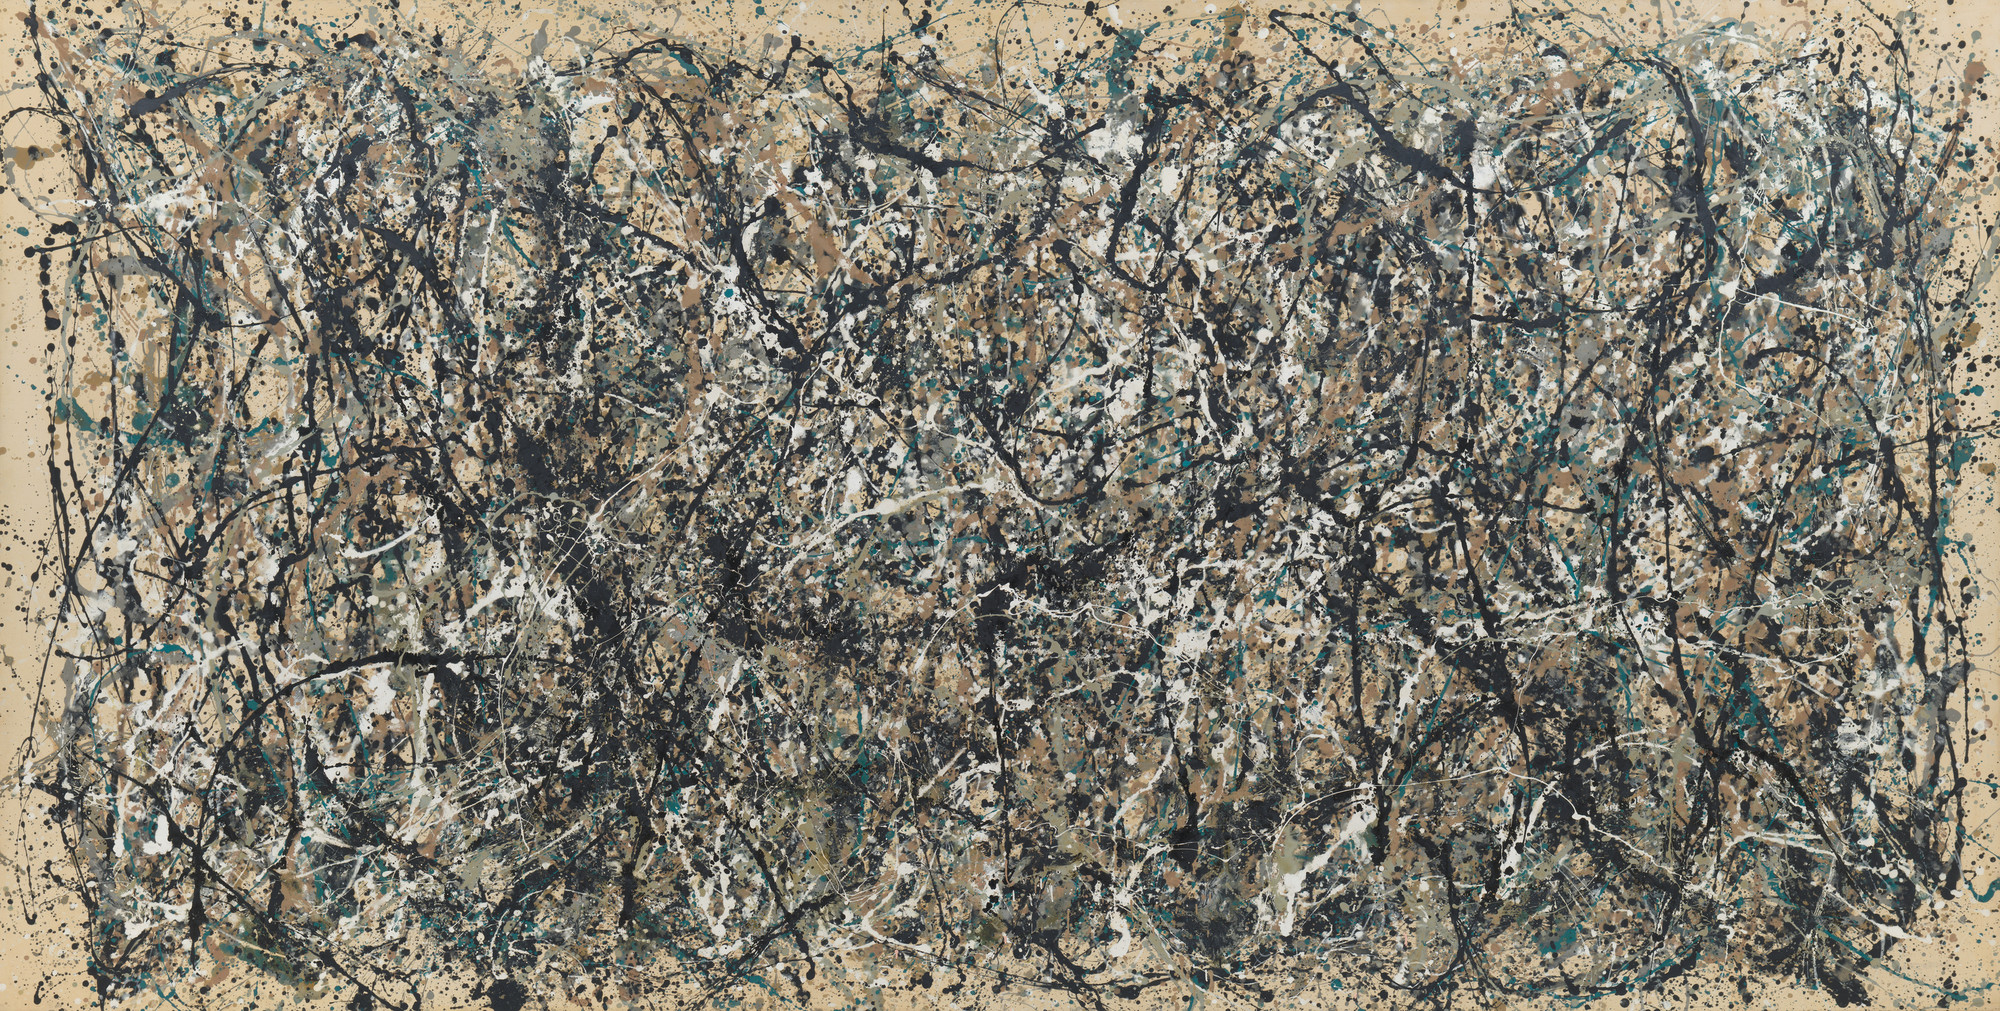 Jackson Pollock. One: Number 31, 1950. 1950. Oil and enamel paint on canvas, 8’ 10” × 17’ 5 5/8” (269.5 × 530.8 cm). The Museum of Modern Art, New York. Sidney and Harriet Janis Collection Fund (by exchange). © 2024 Pollock-Krasner Foundation/Artists Rights Society (ARS), New York